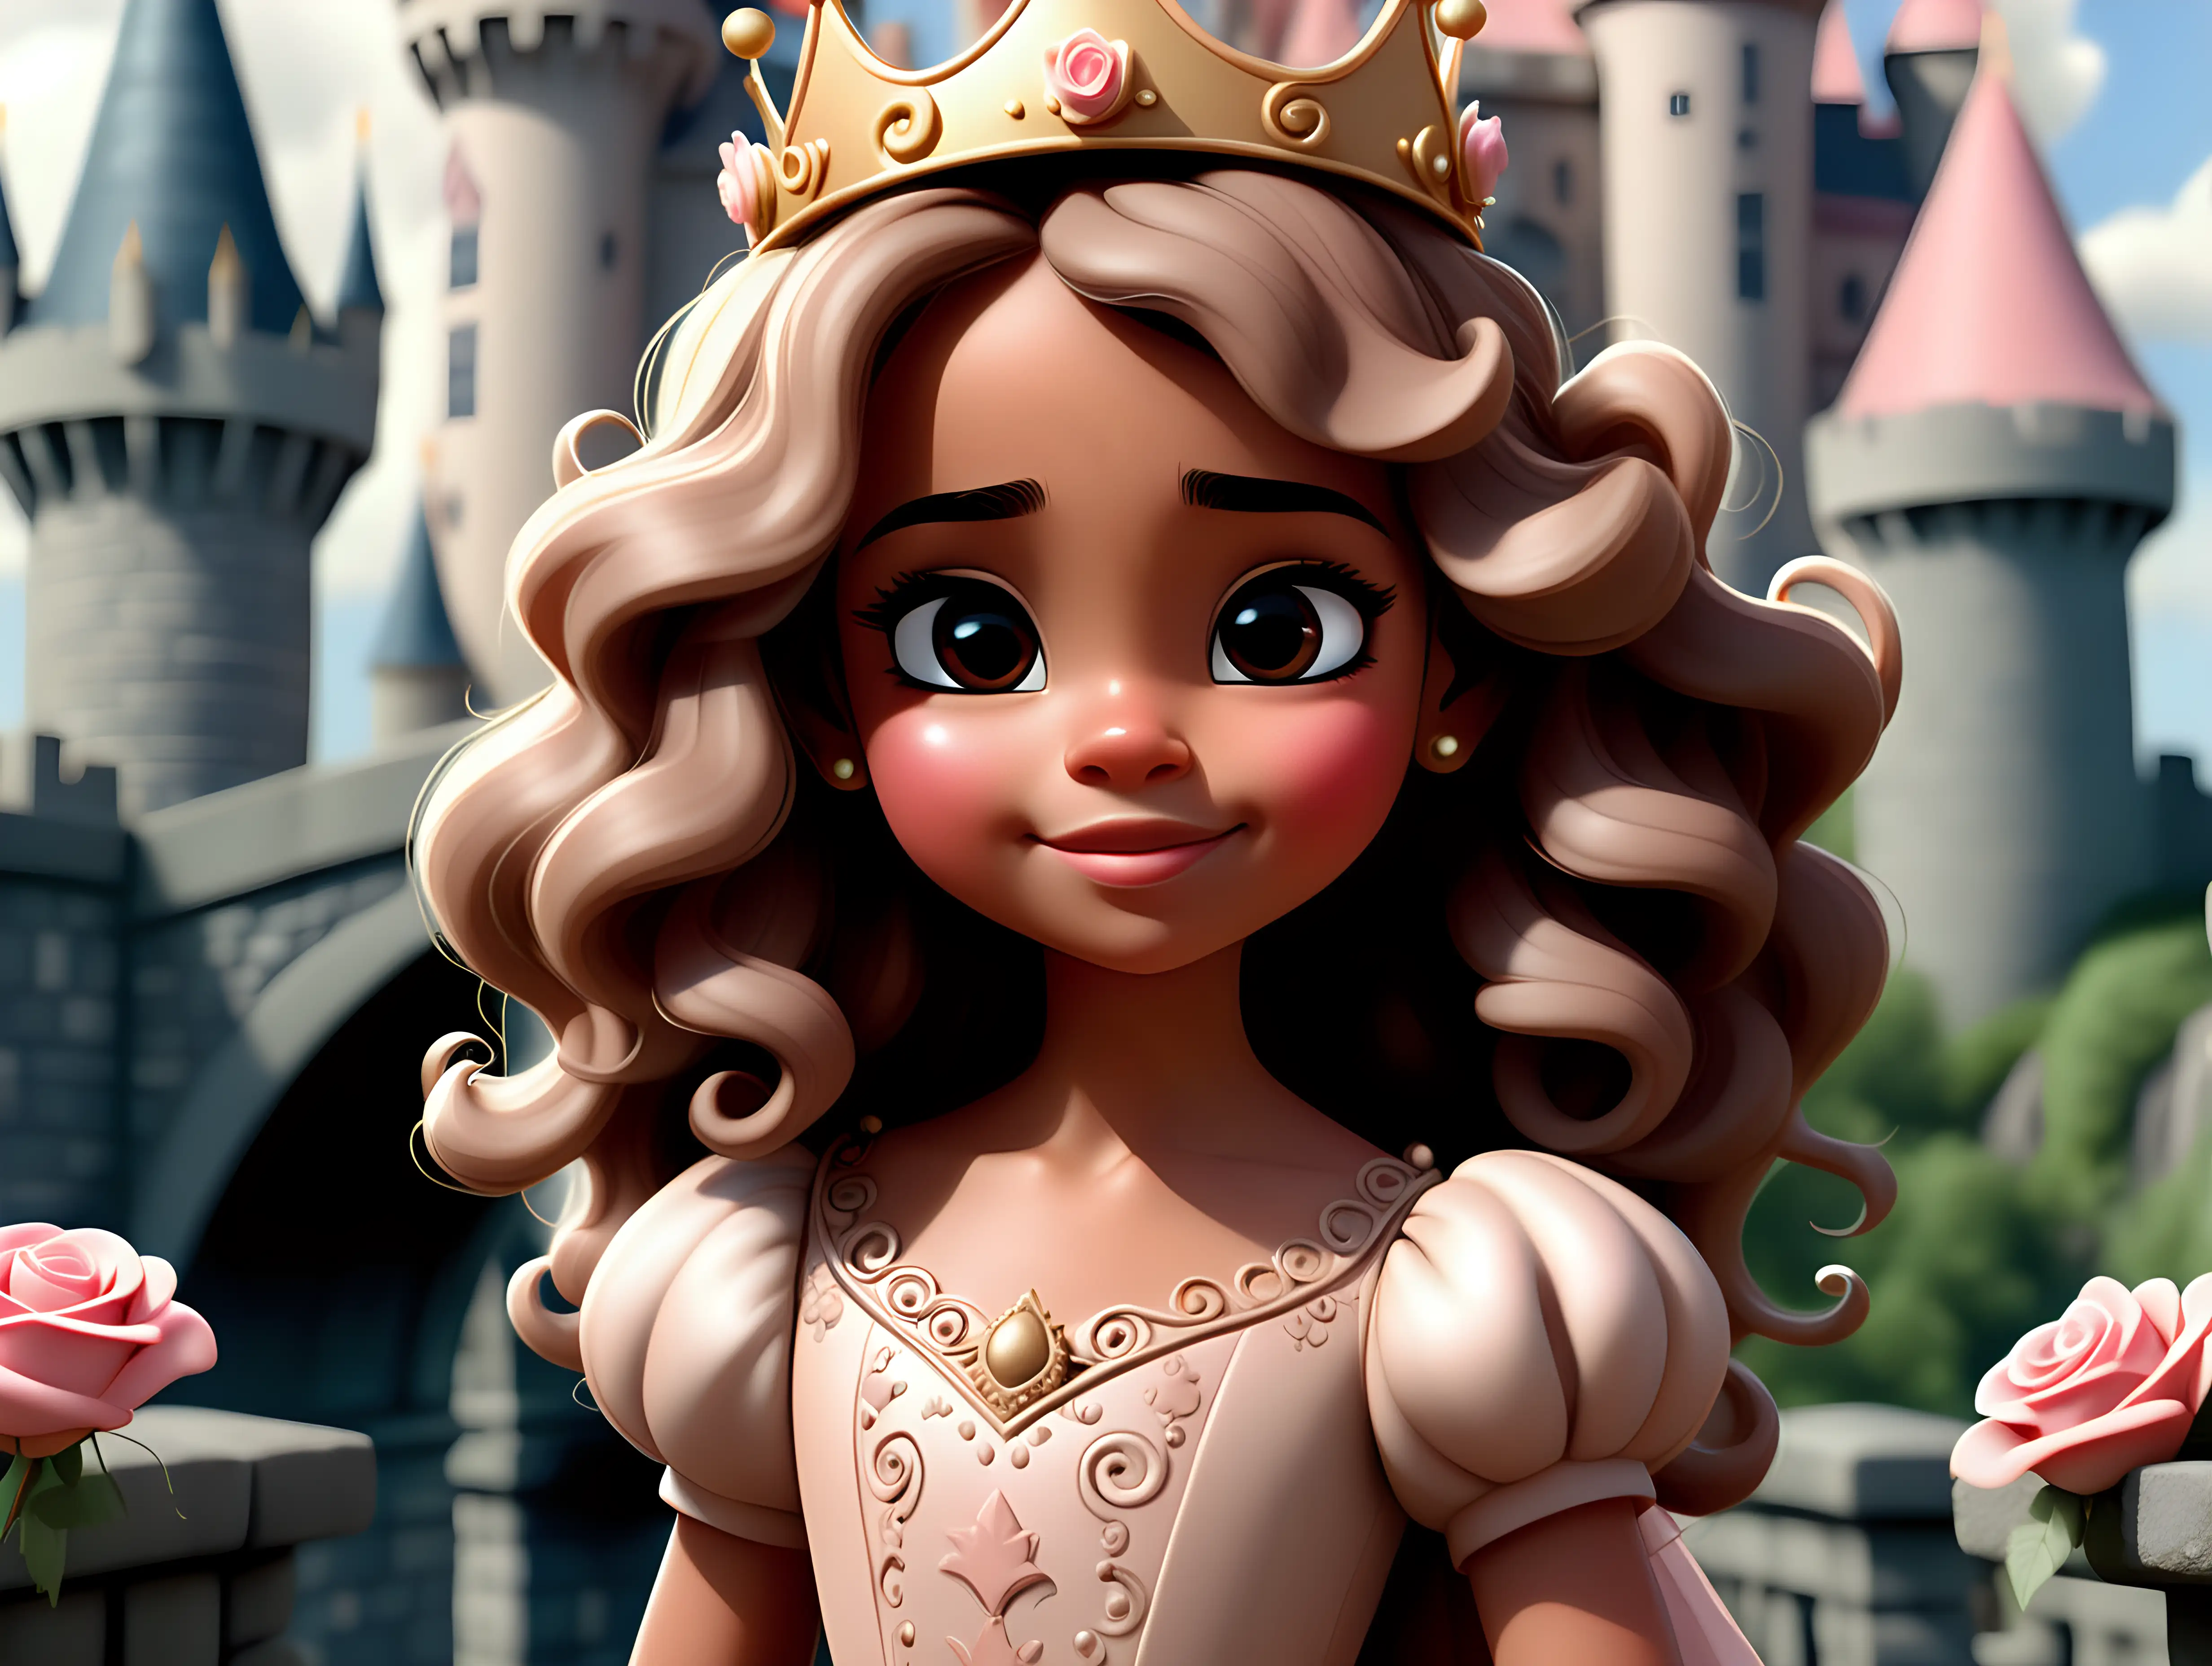 Enchanting Princess on Castle Bridge with Roses and Shiny Crown